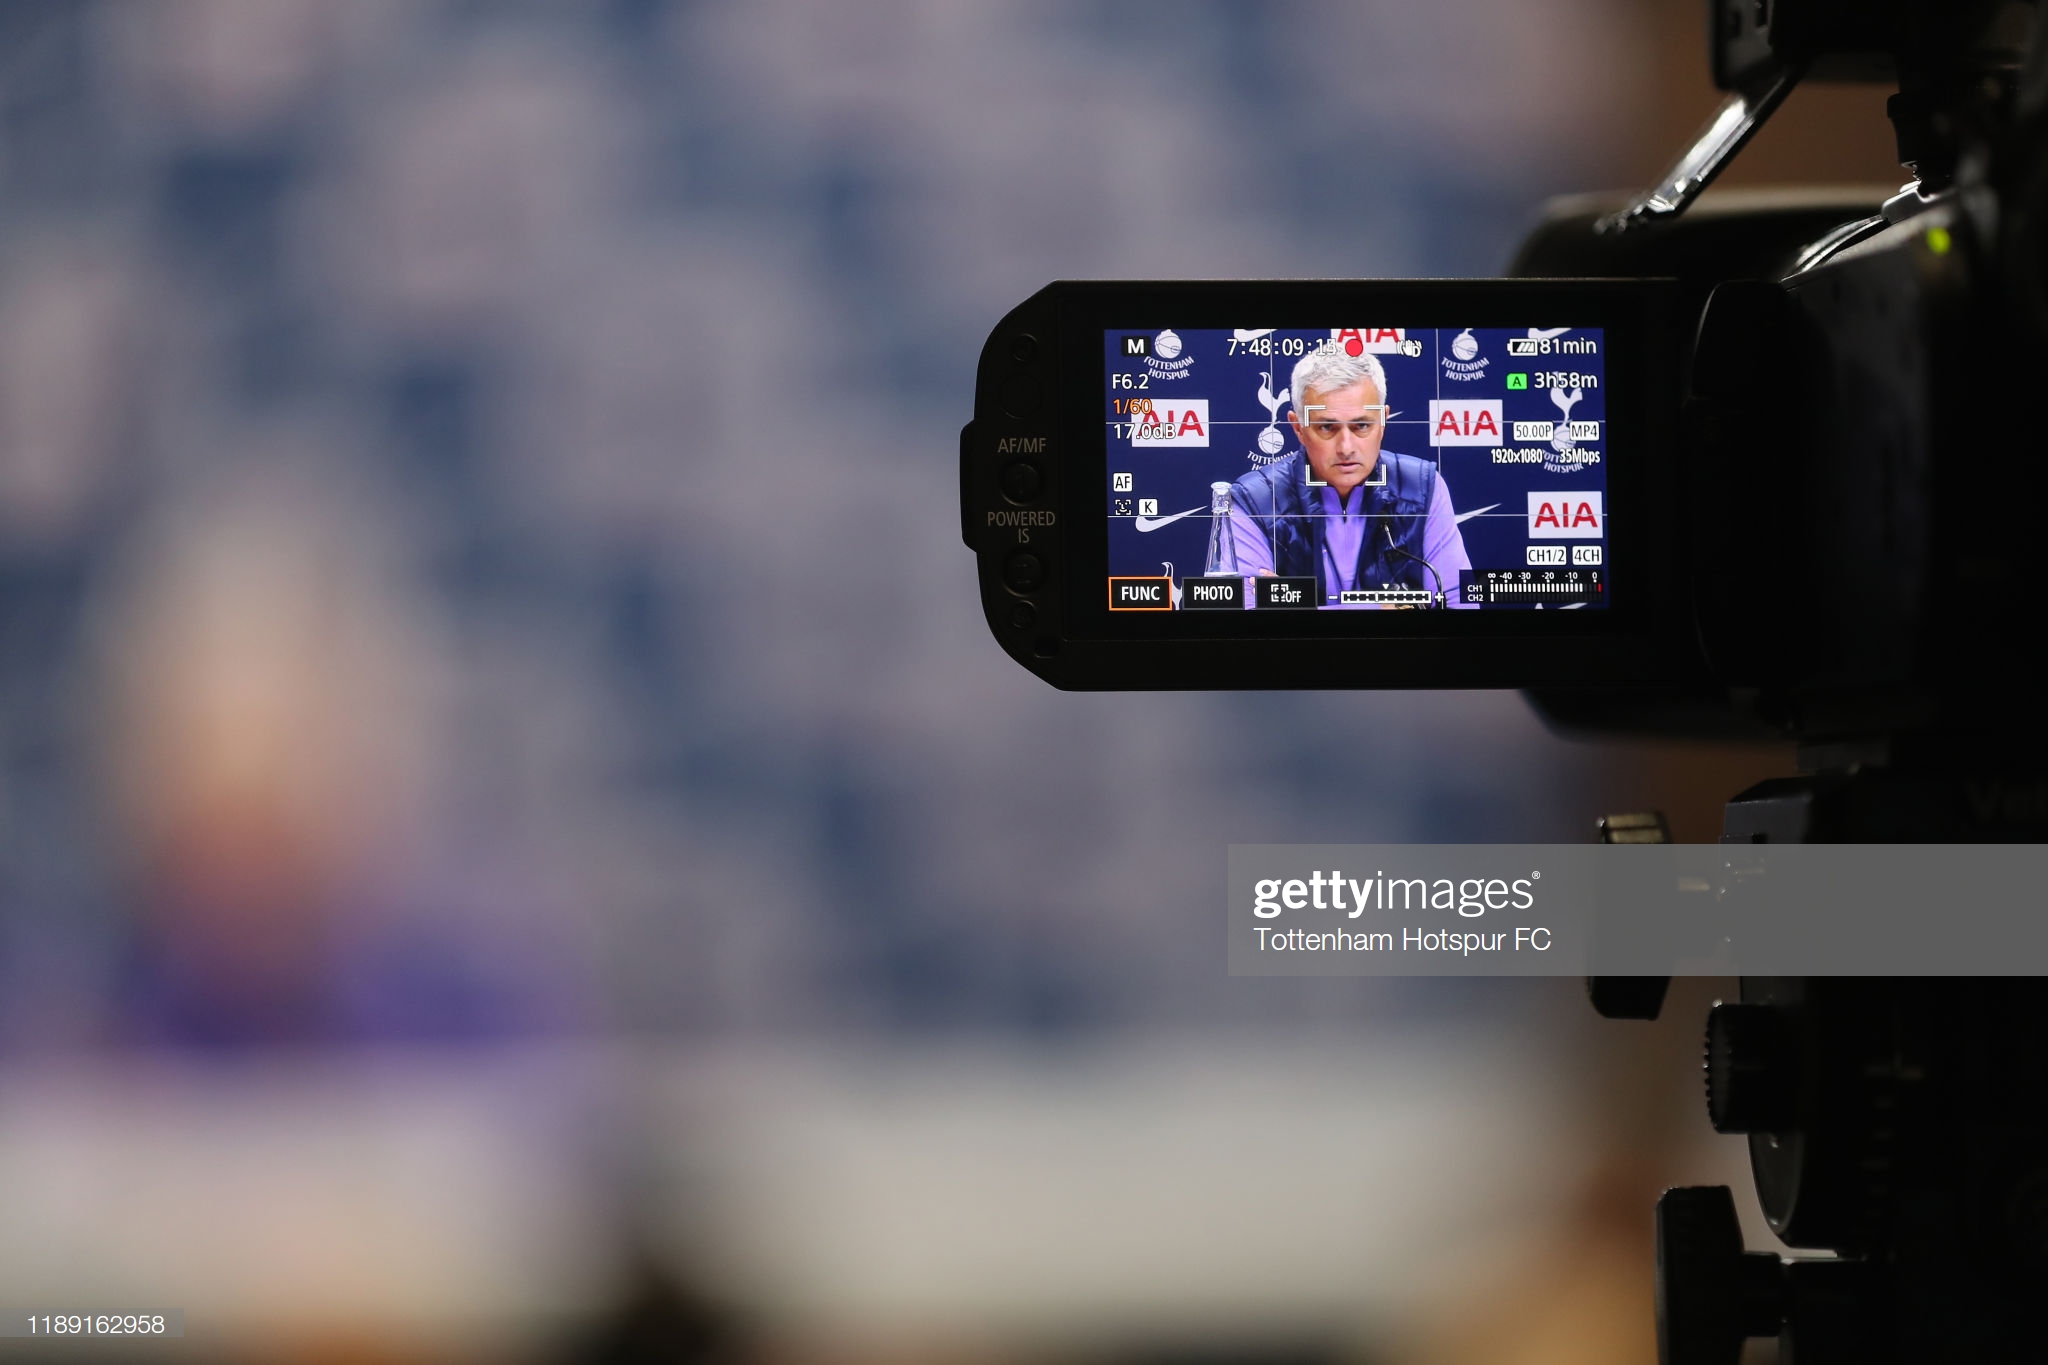 gettyimages-1189162958-2048x2048.jpg